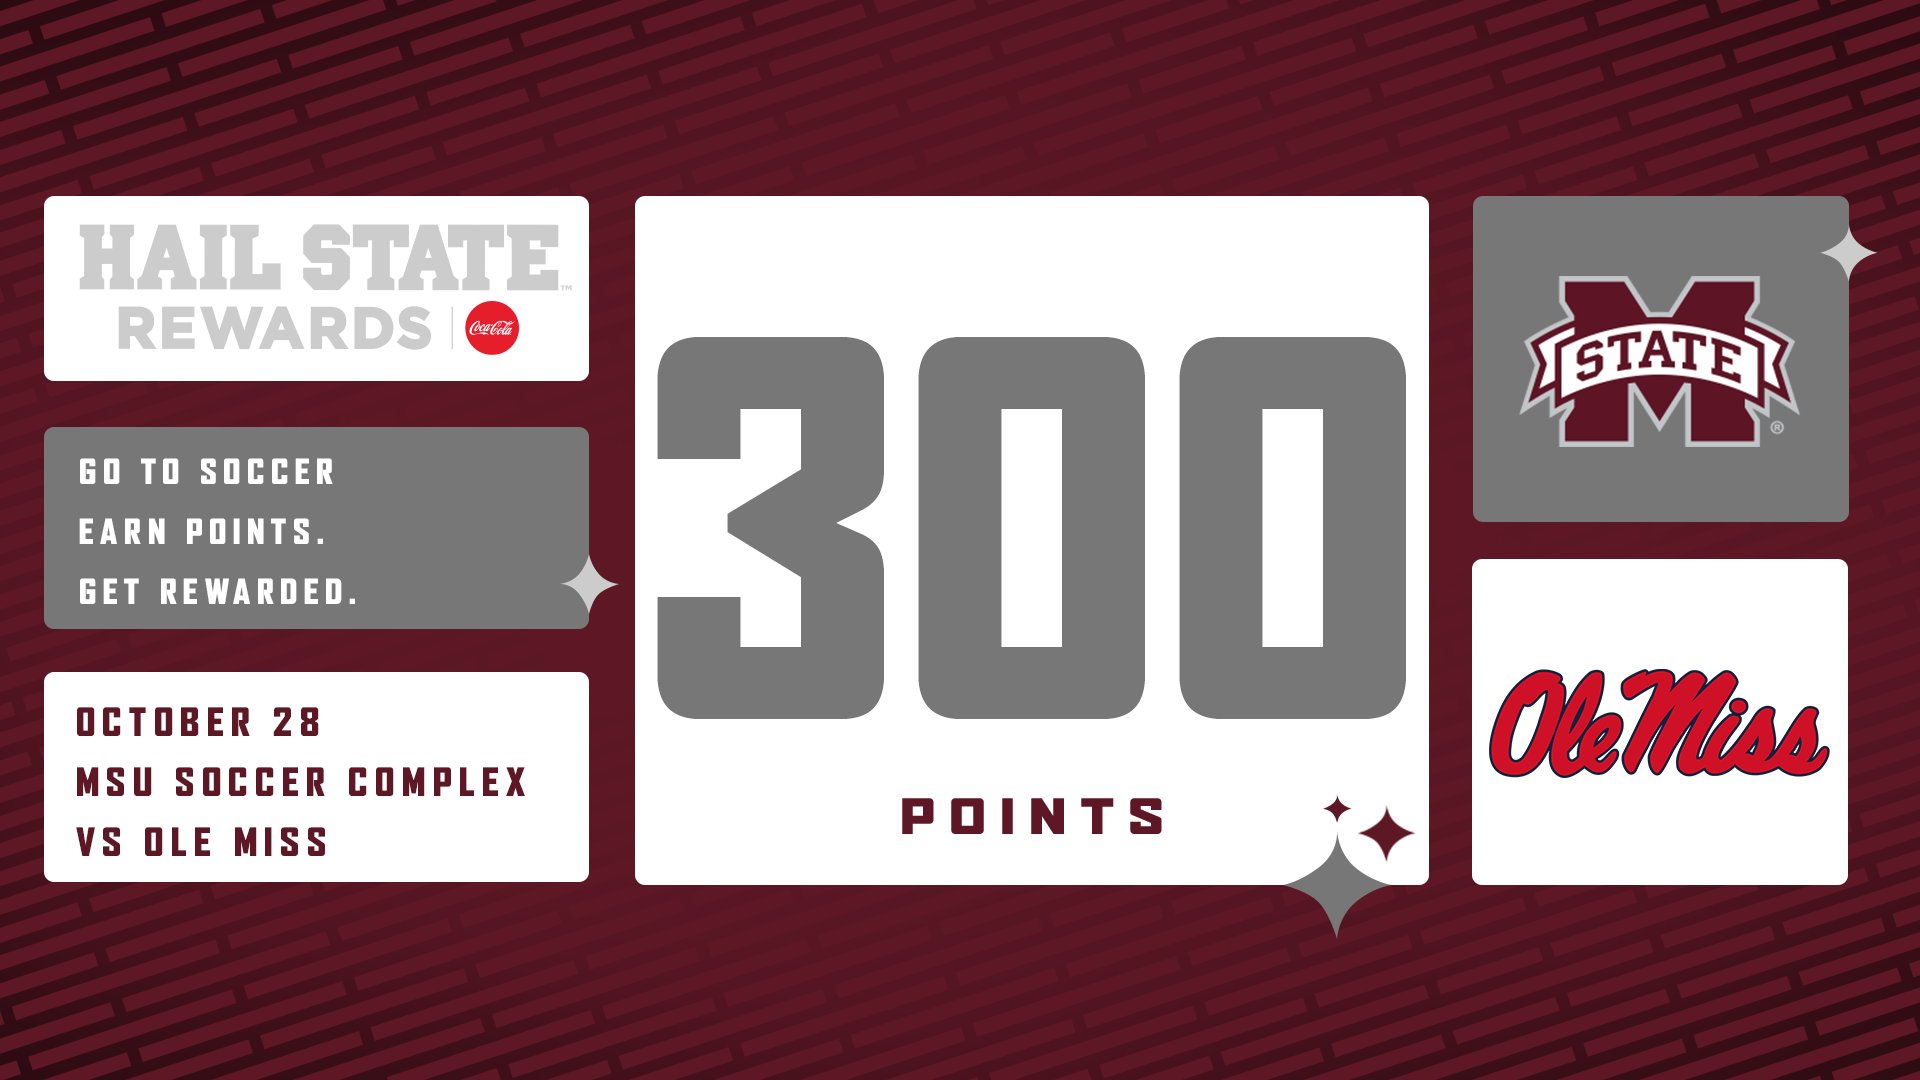 Maroon, white and gray graphic reminding students who are Hail State Rewards members that they will receive 300 points for attendance at MSU's soccer game versus Ole Miss